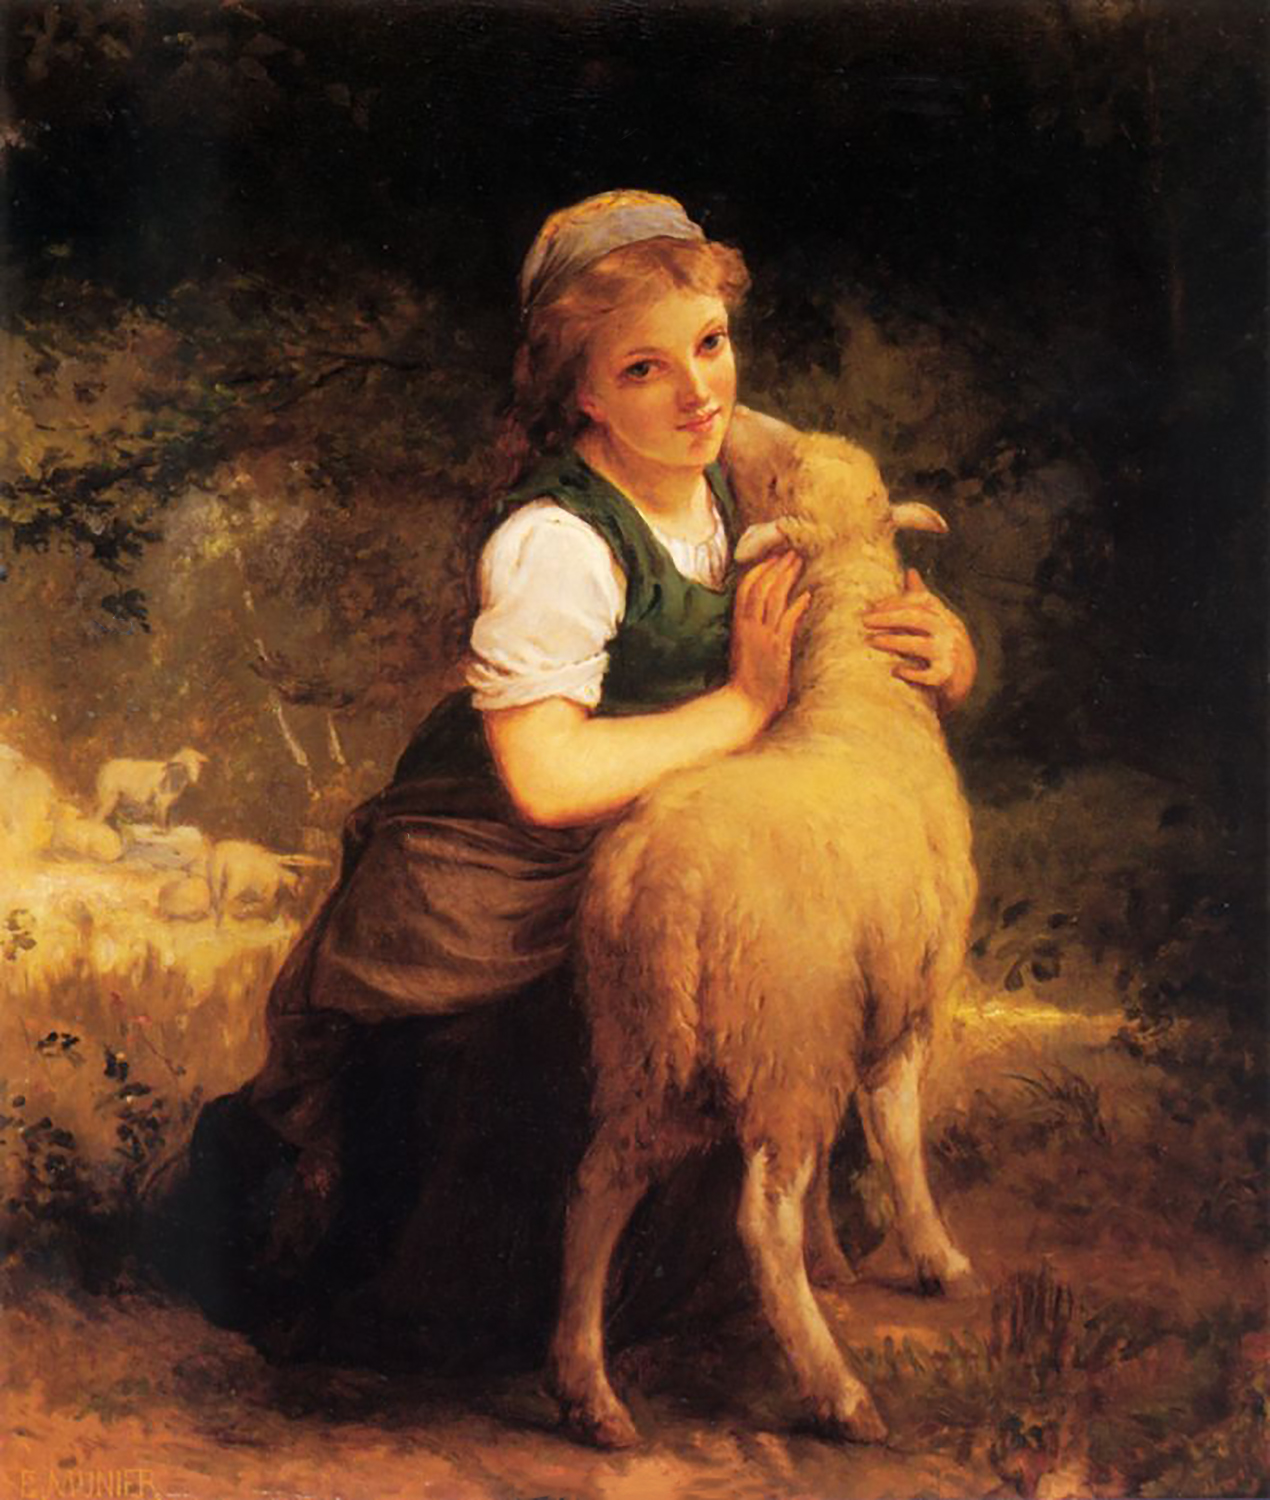 A young girl holding a lamb - Young Girl with Lamb - Emile Munier